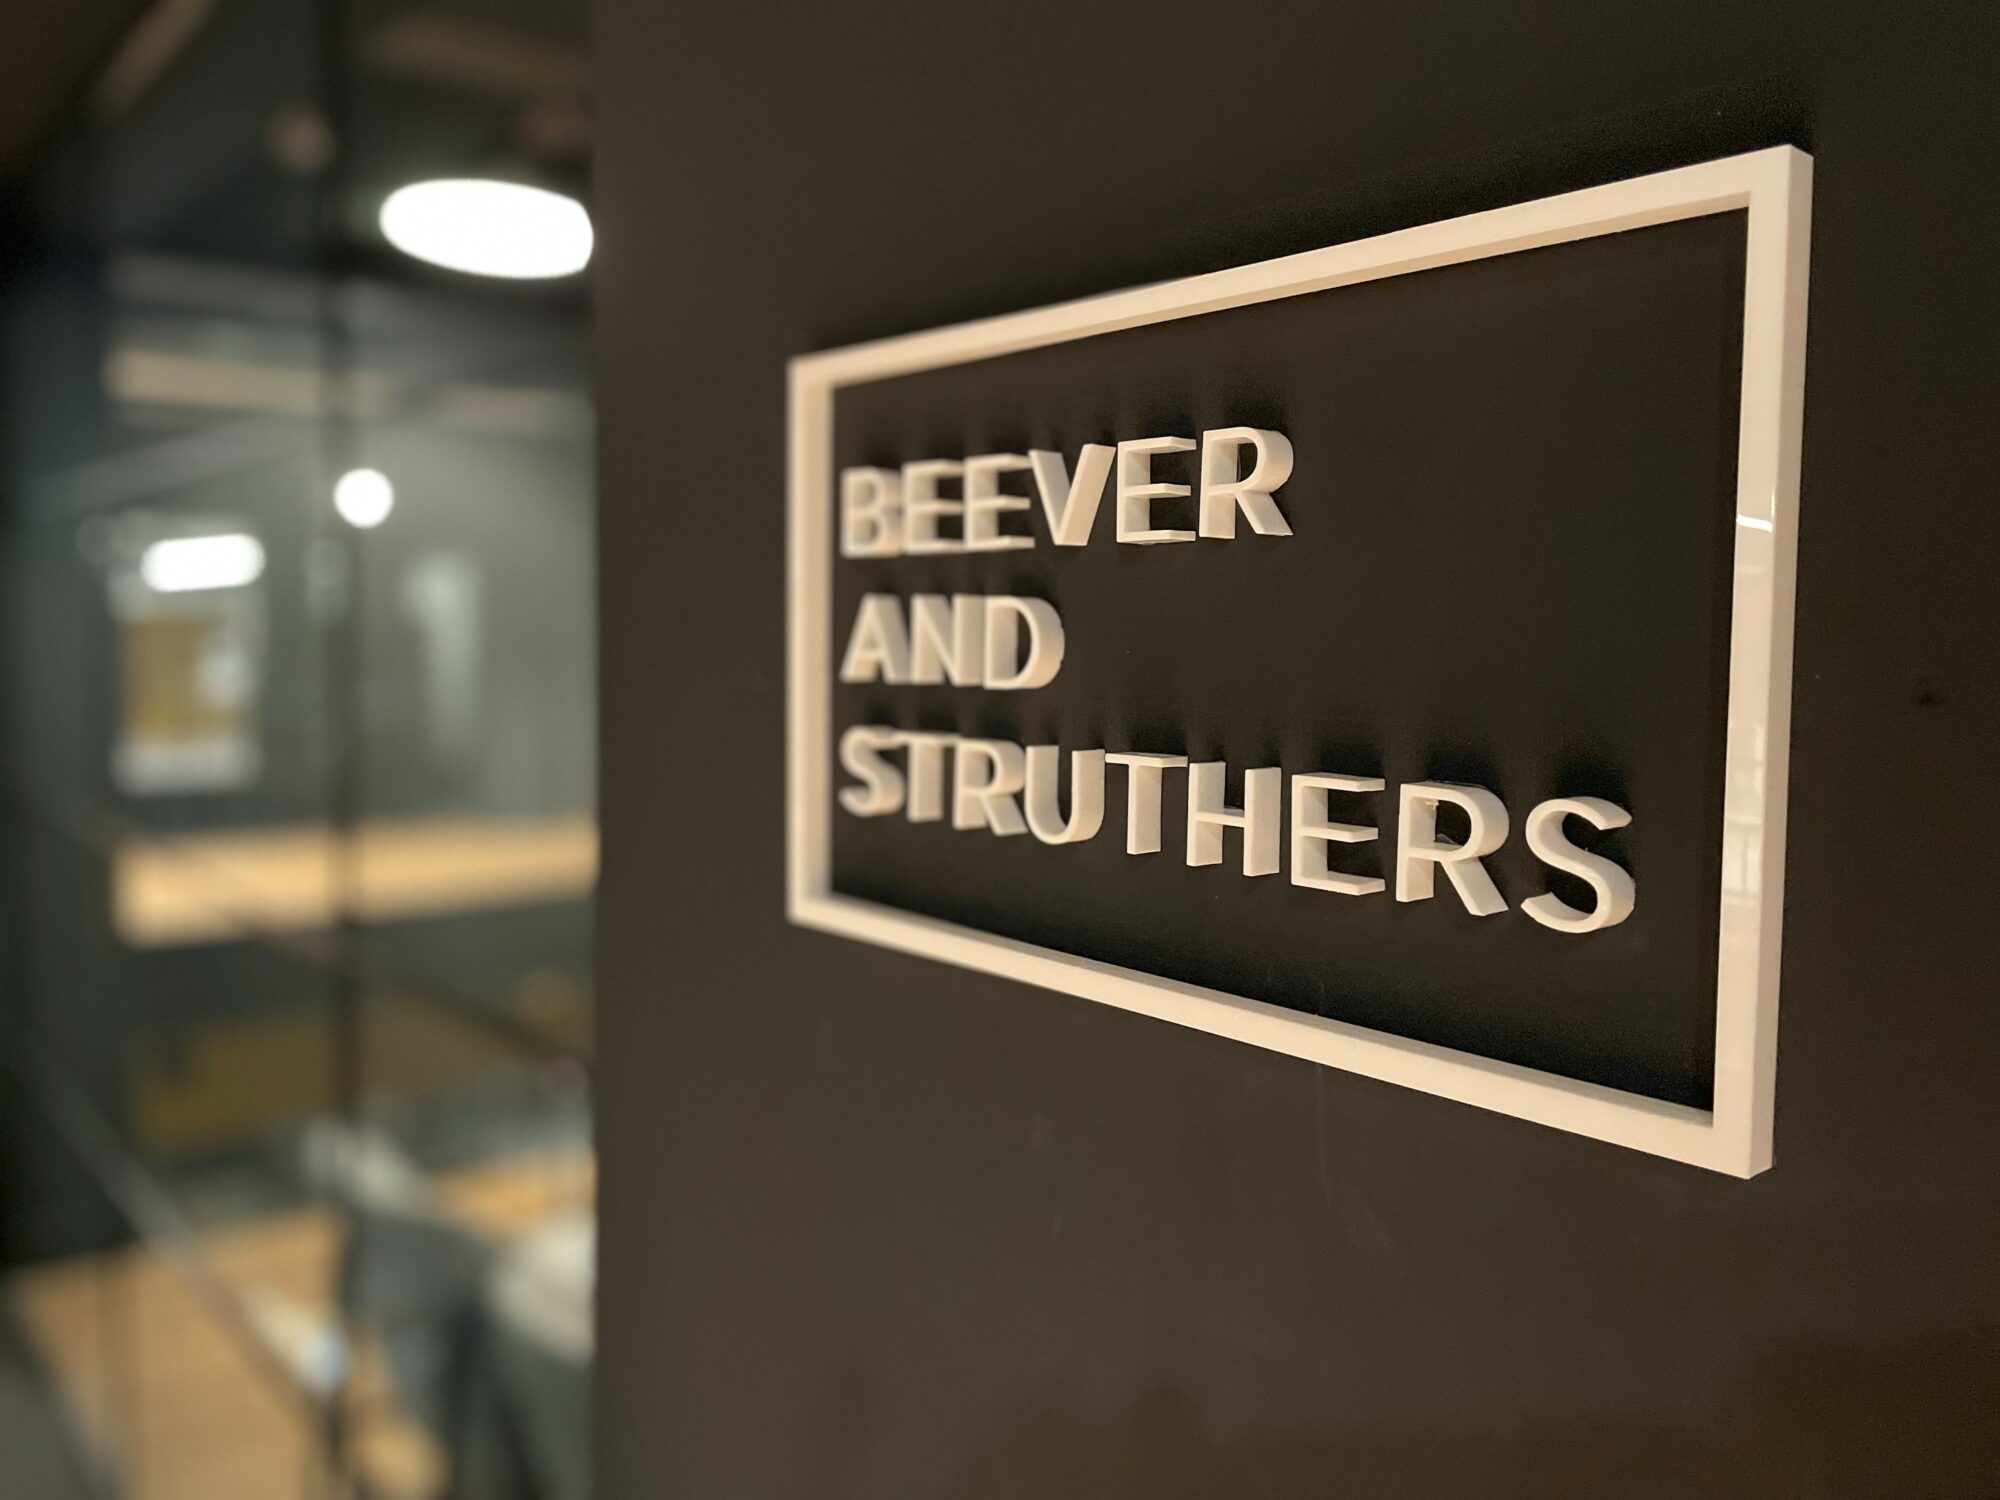 Beevers and Struthers logo as a sign on the wall.